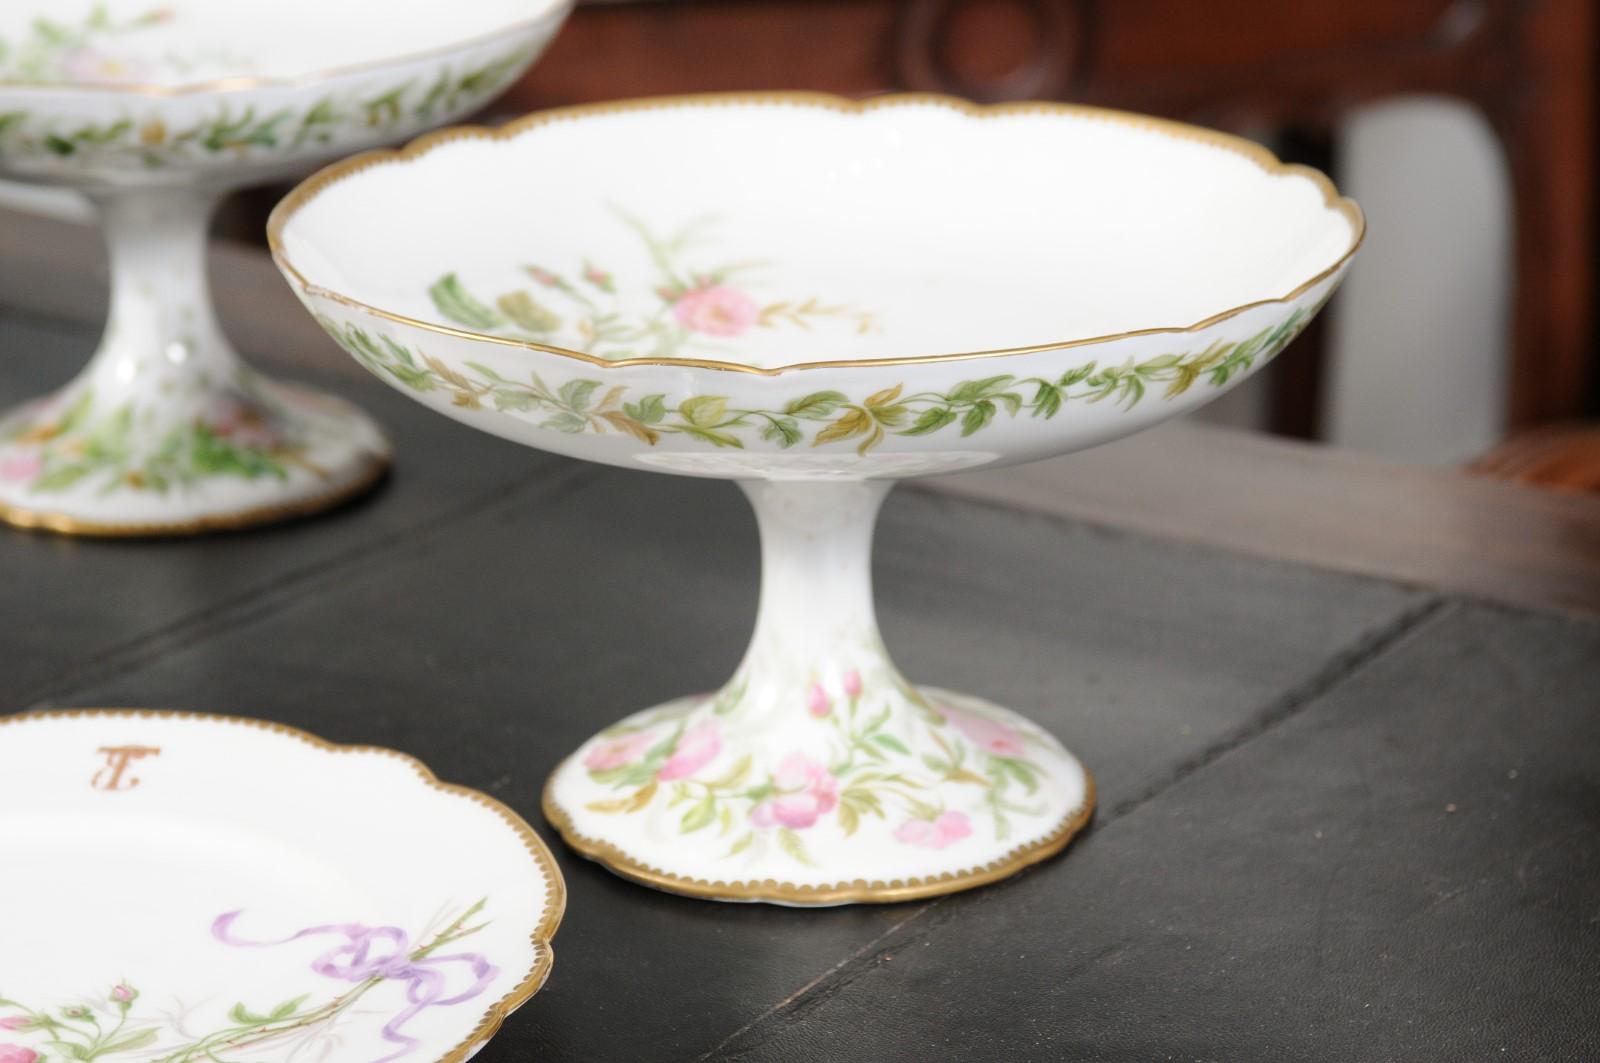 English Porcelain Compotes and Plates with Floral Décor and Gilt Trim For Sale 3